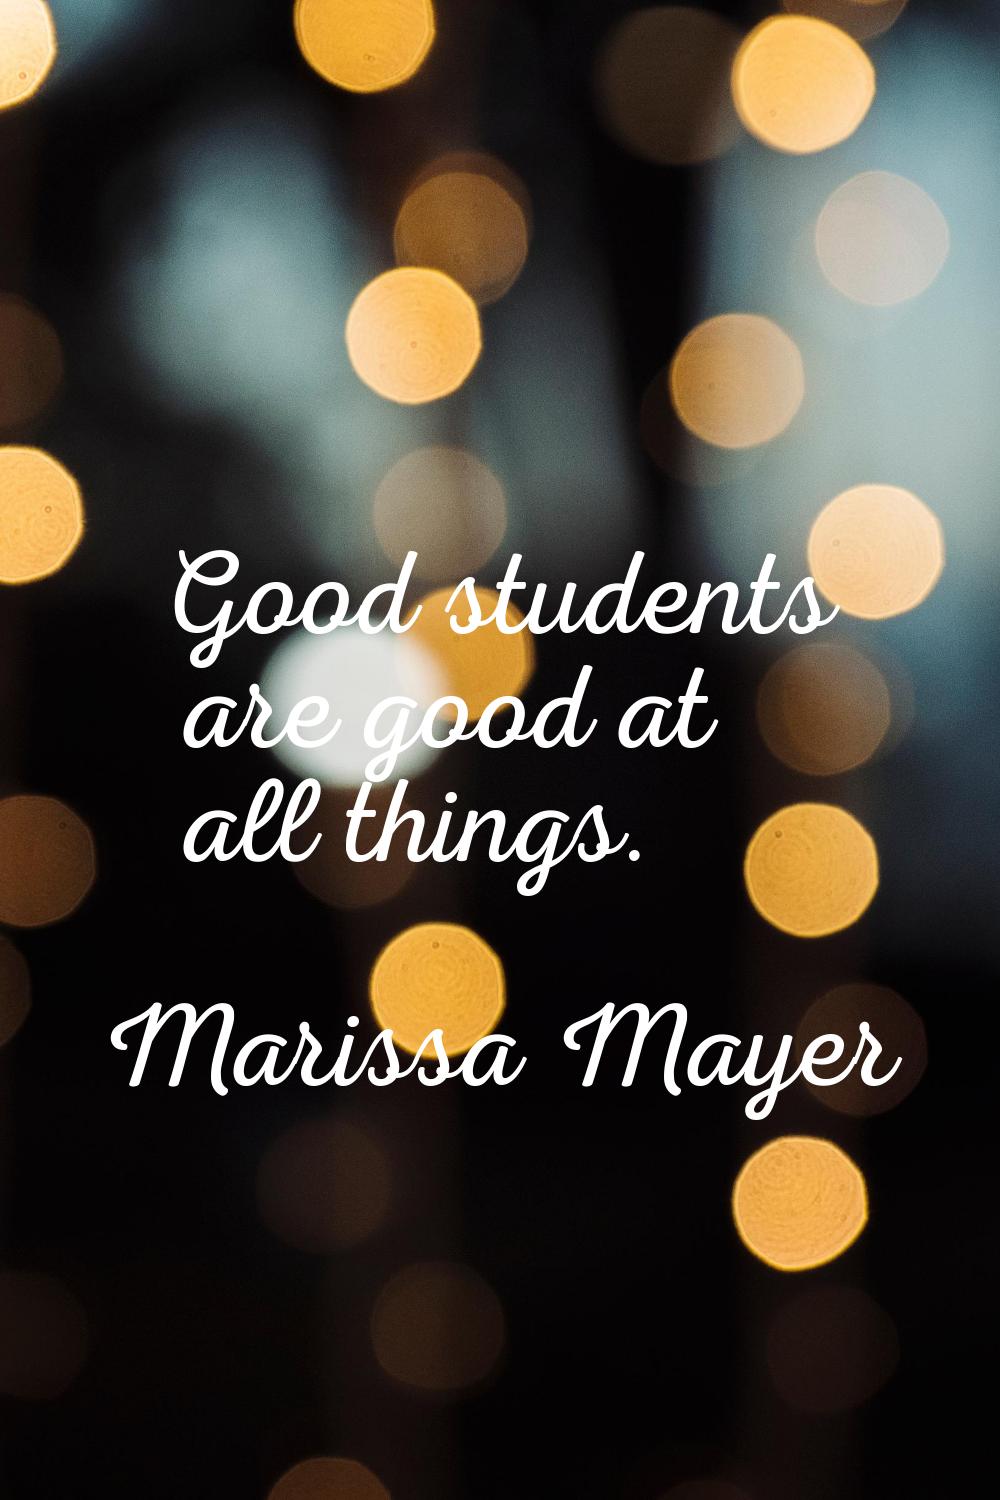 Good students are good at all things.